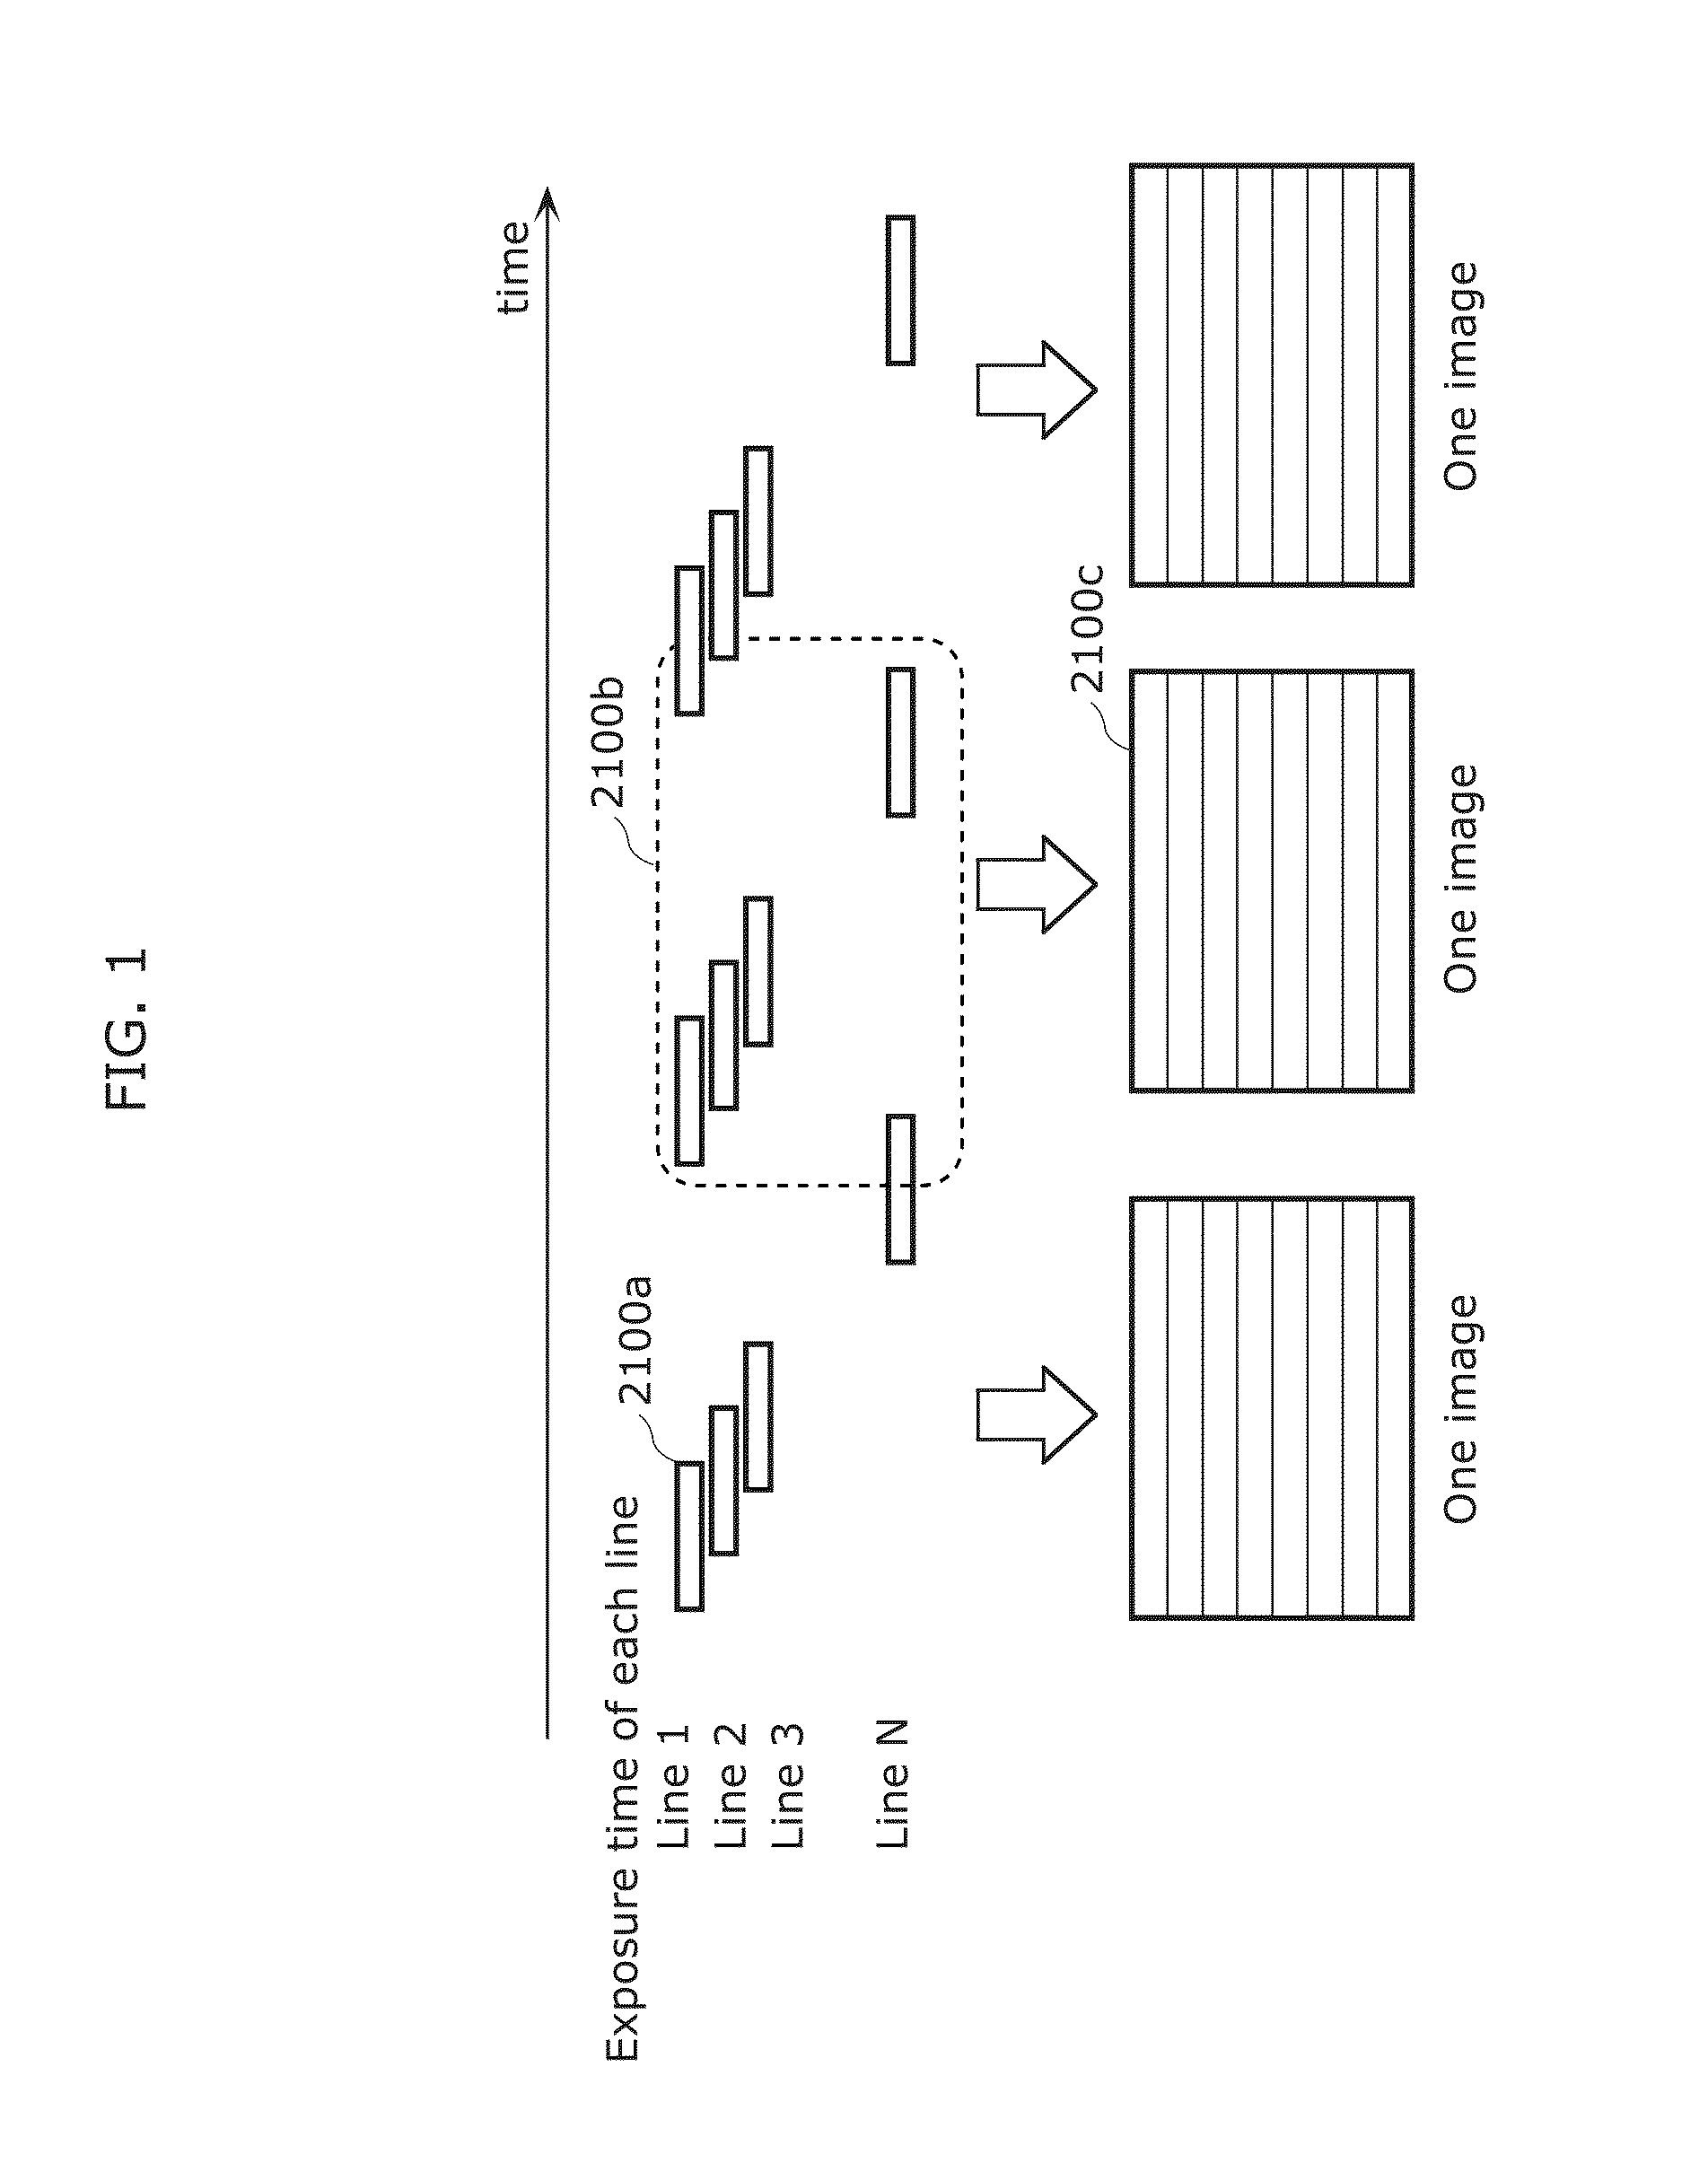 Information processing method for generating encoded signal for visible light communication